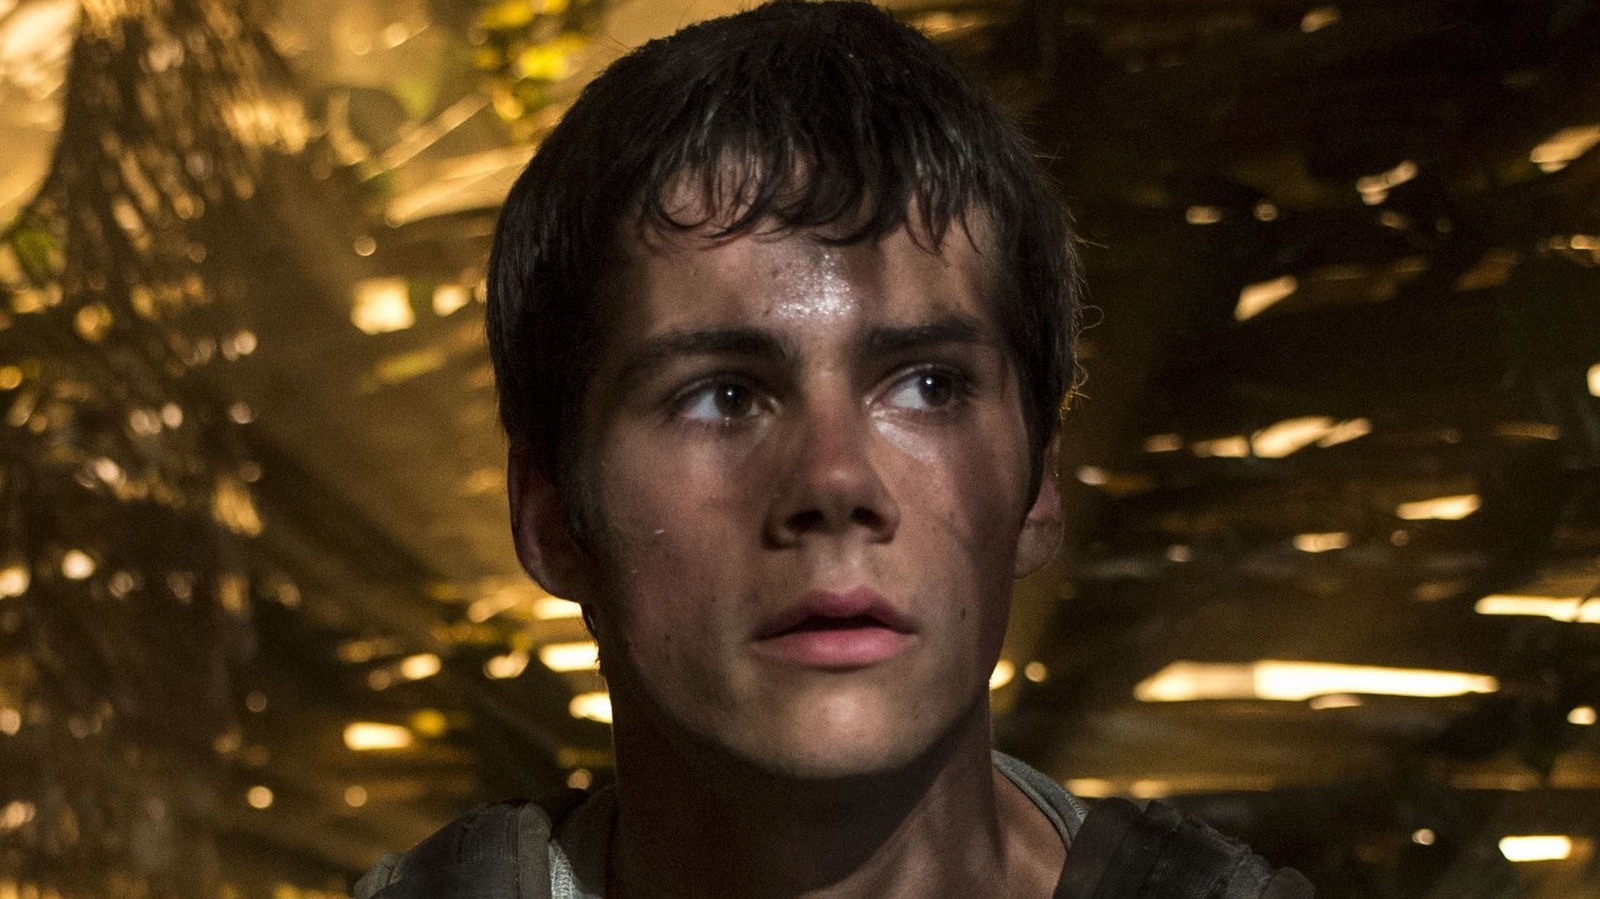 The End Is Here! The Final Trailer For 'Maze Runner: The Death Cure' Arrives